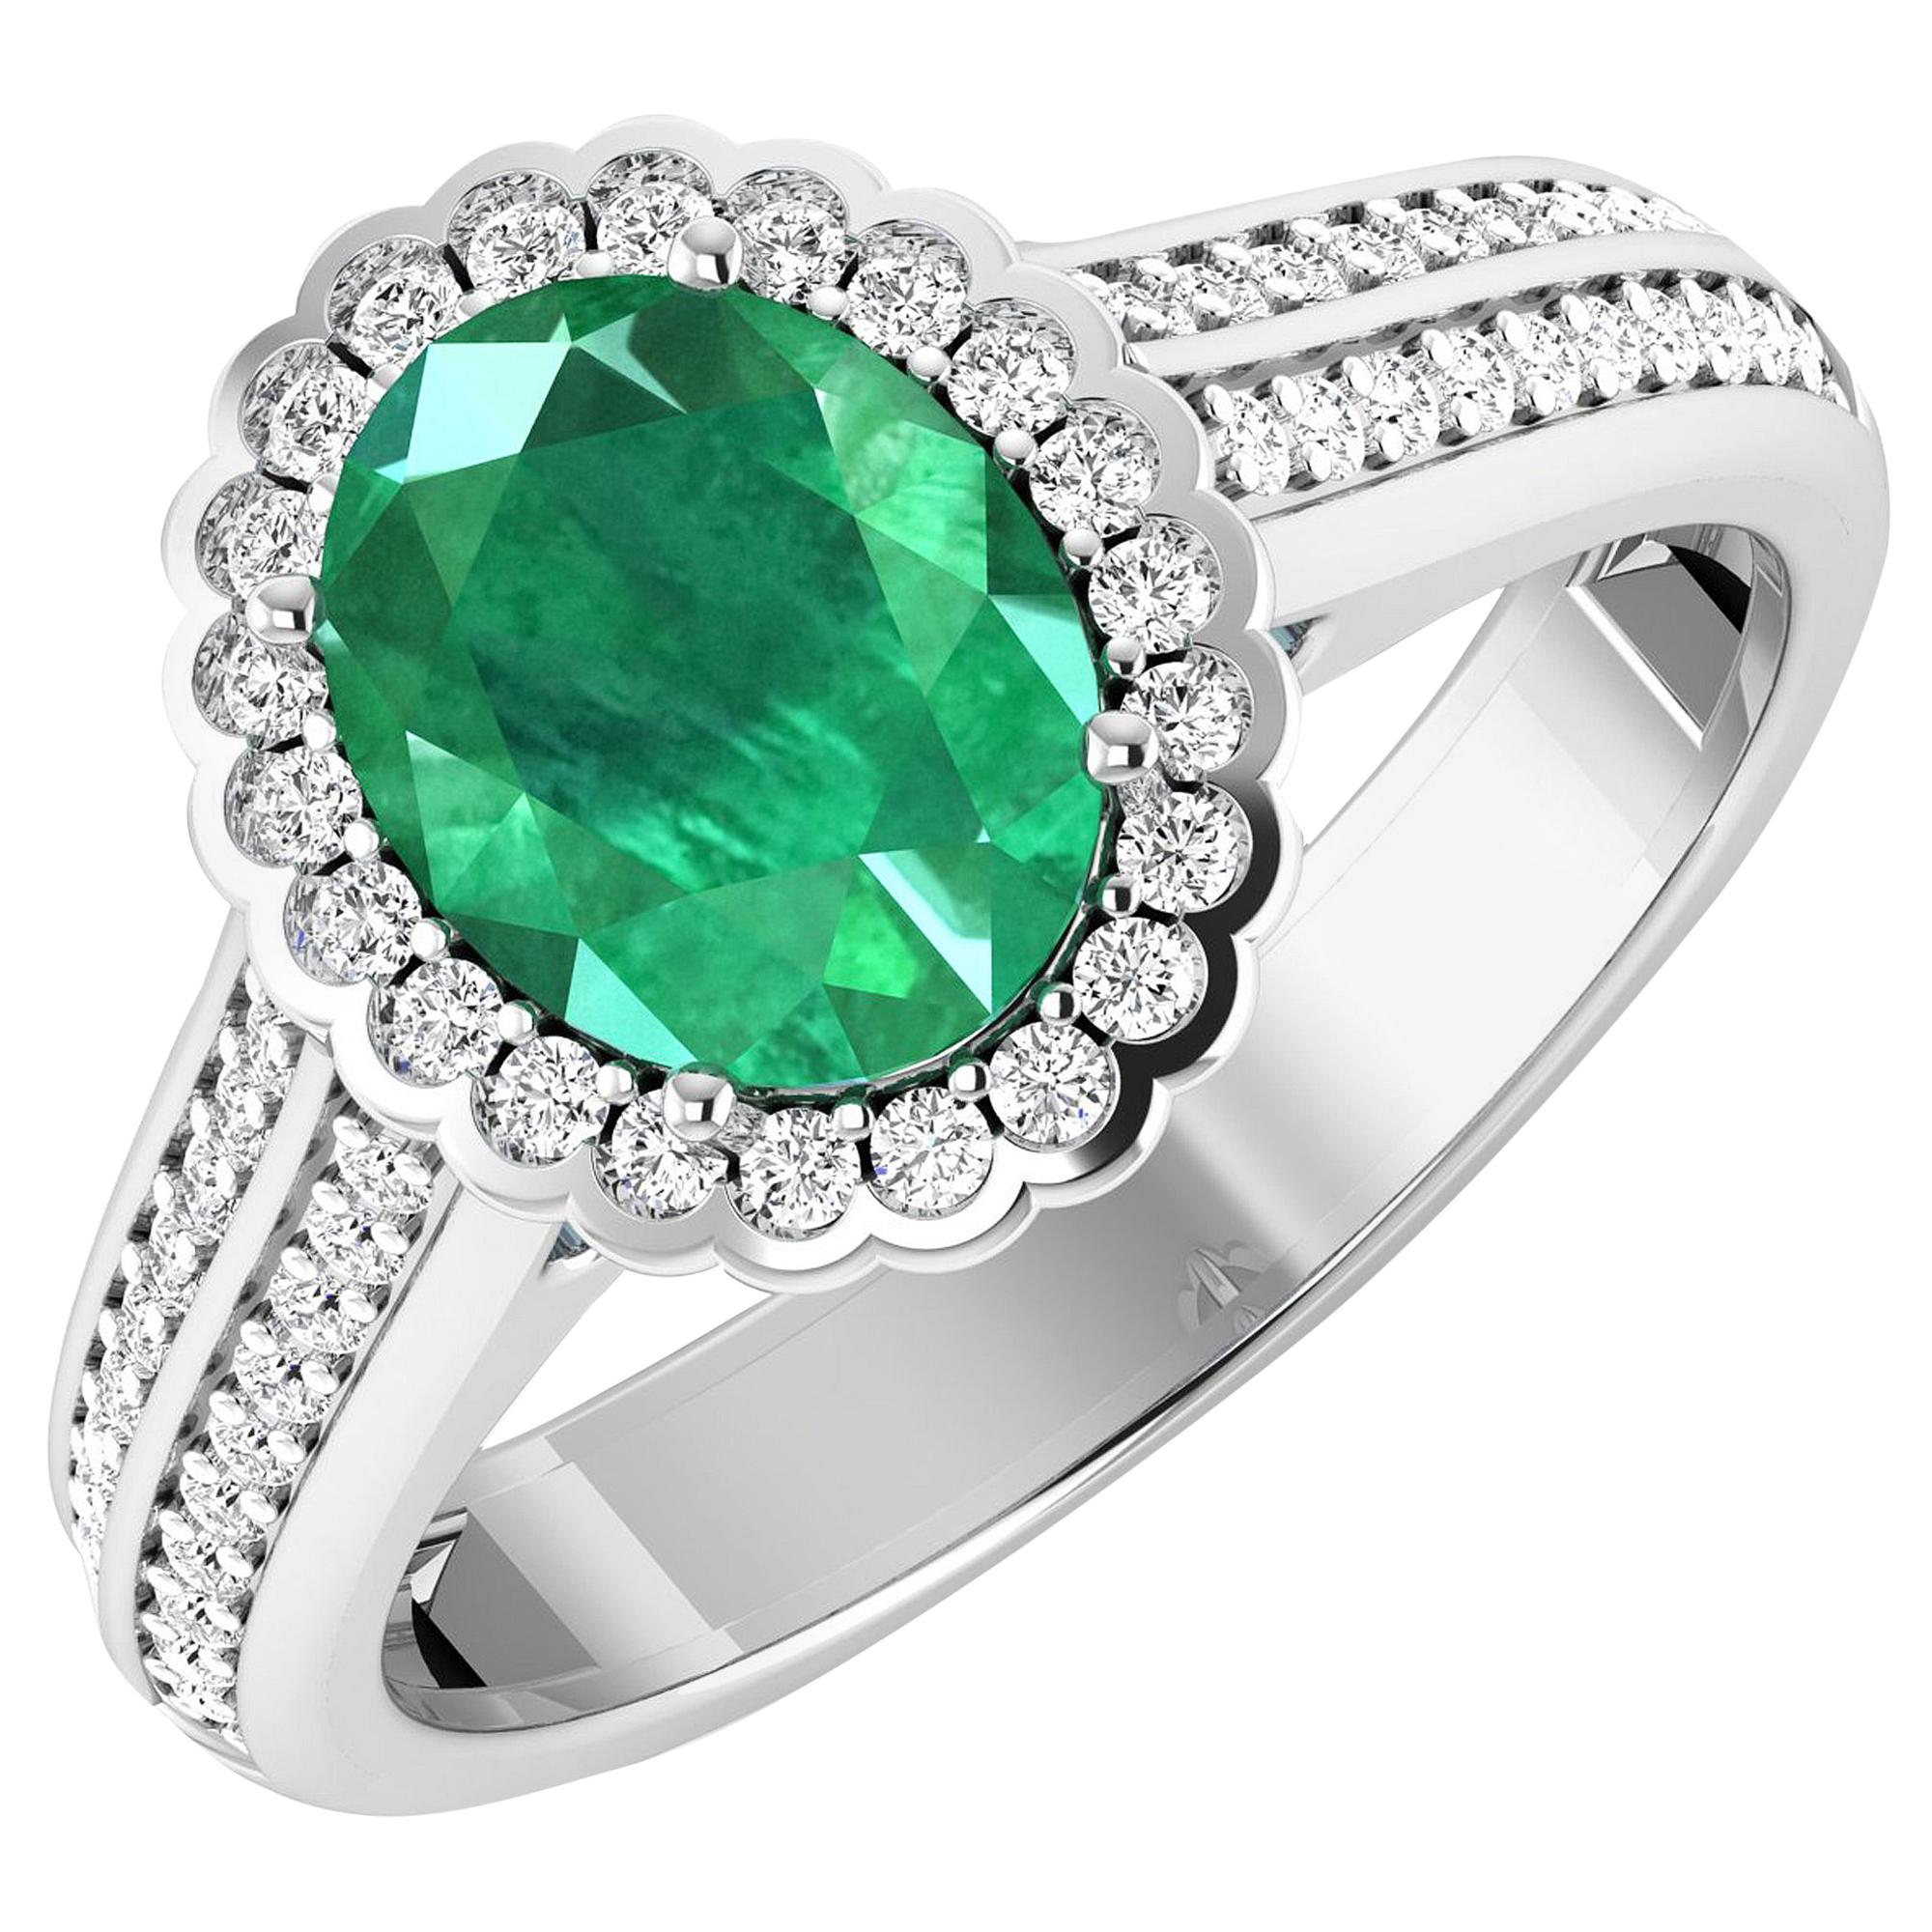 Emerald Gold Ring, 14 Karat Gold Emerald and Diamond Ring, 2.07 Carat For Sale